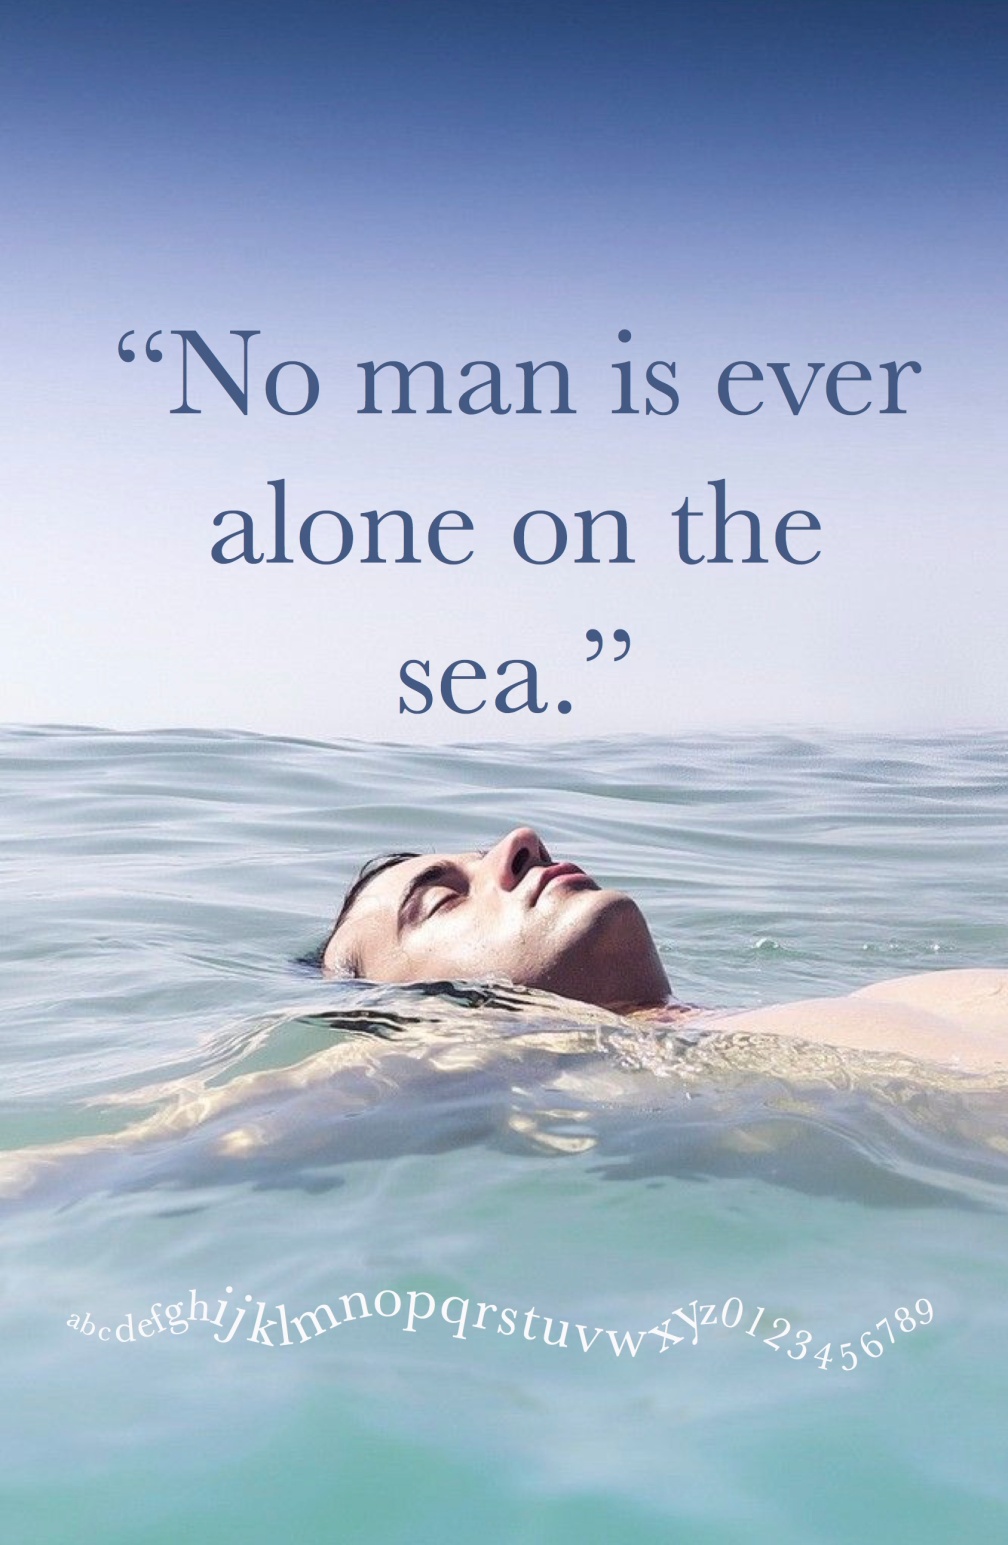 No Man is Ever Alone on the Sea.